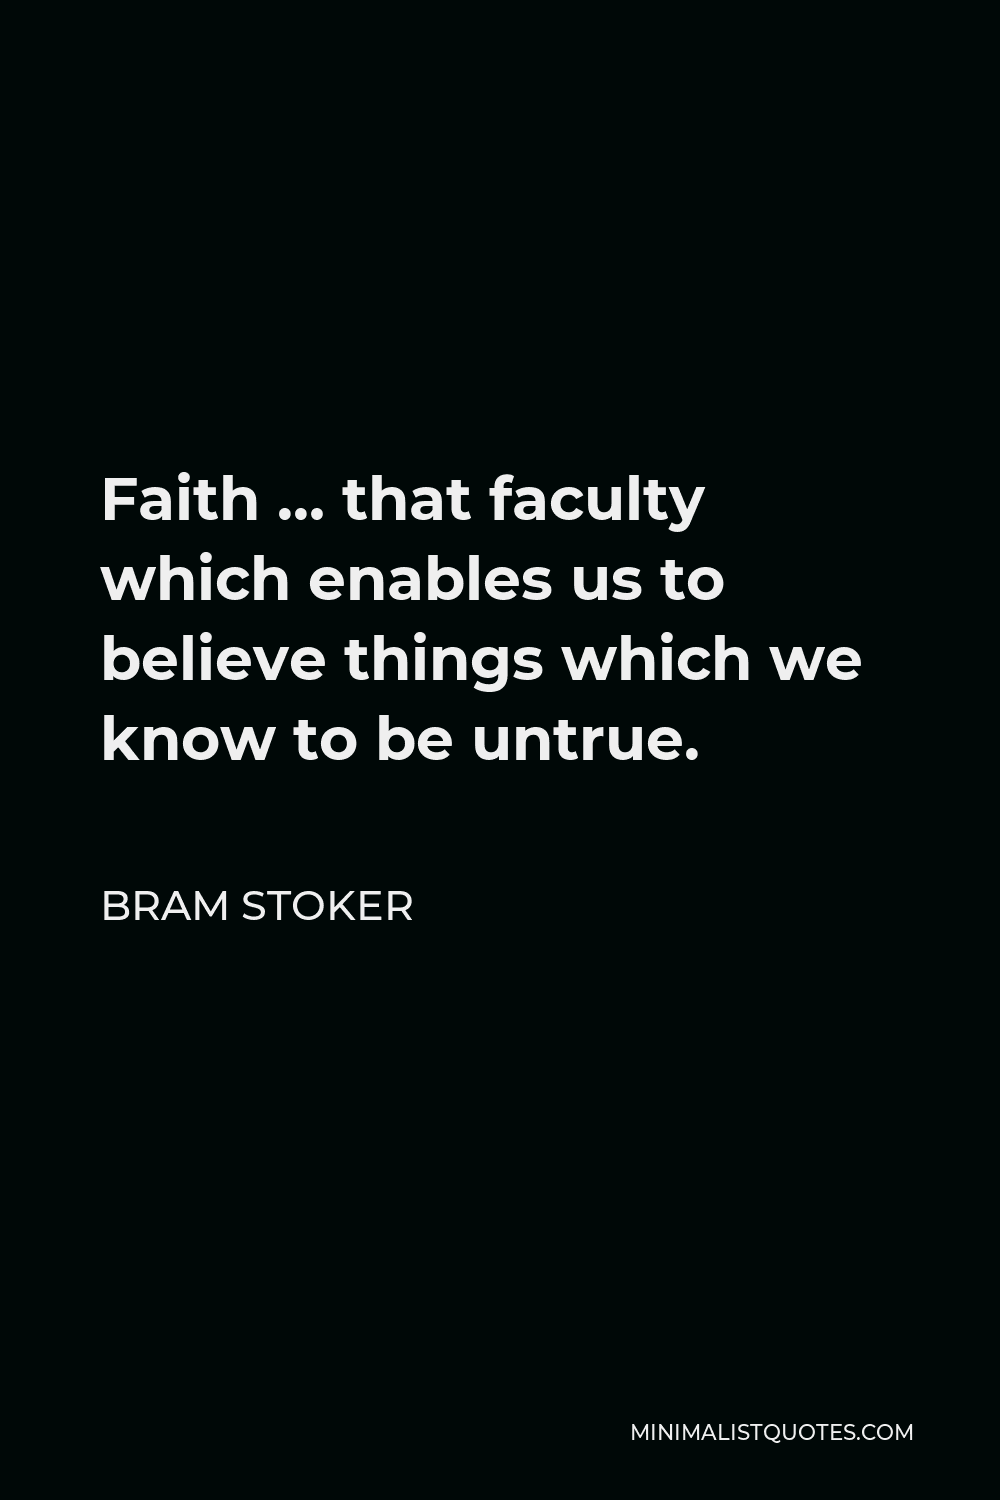 Bram Stoker Quote - Faith … that faculty which enables us to believe things which we know to be untrue.